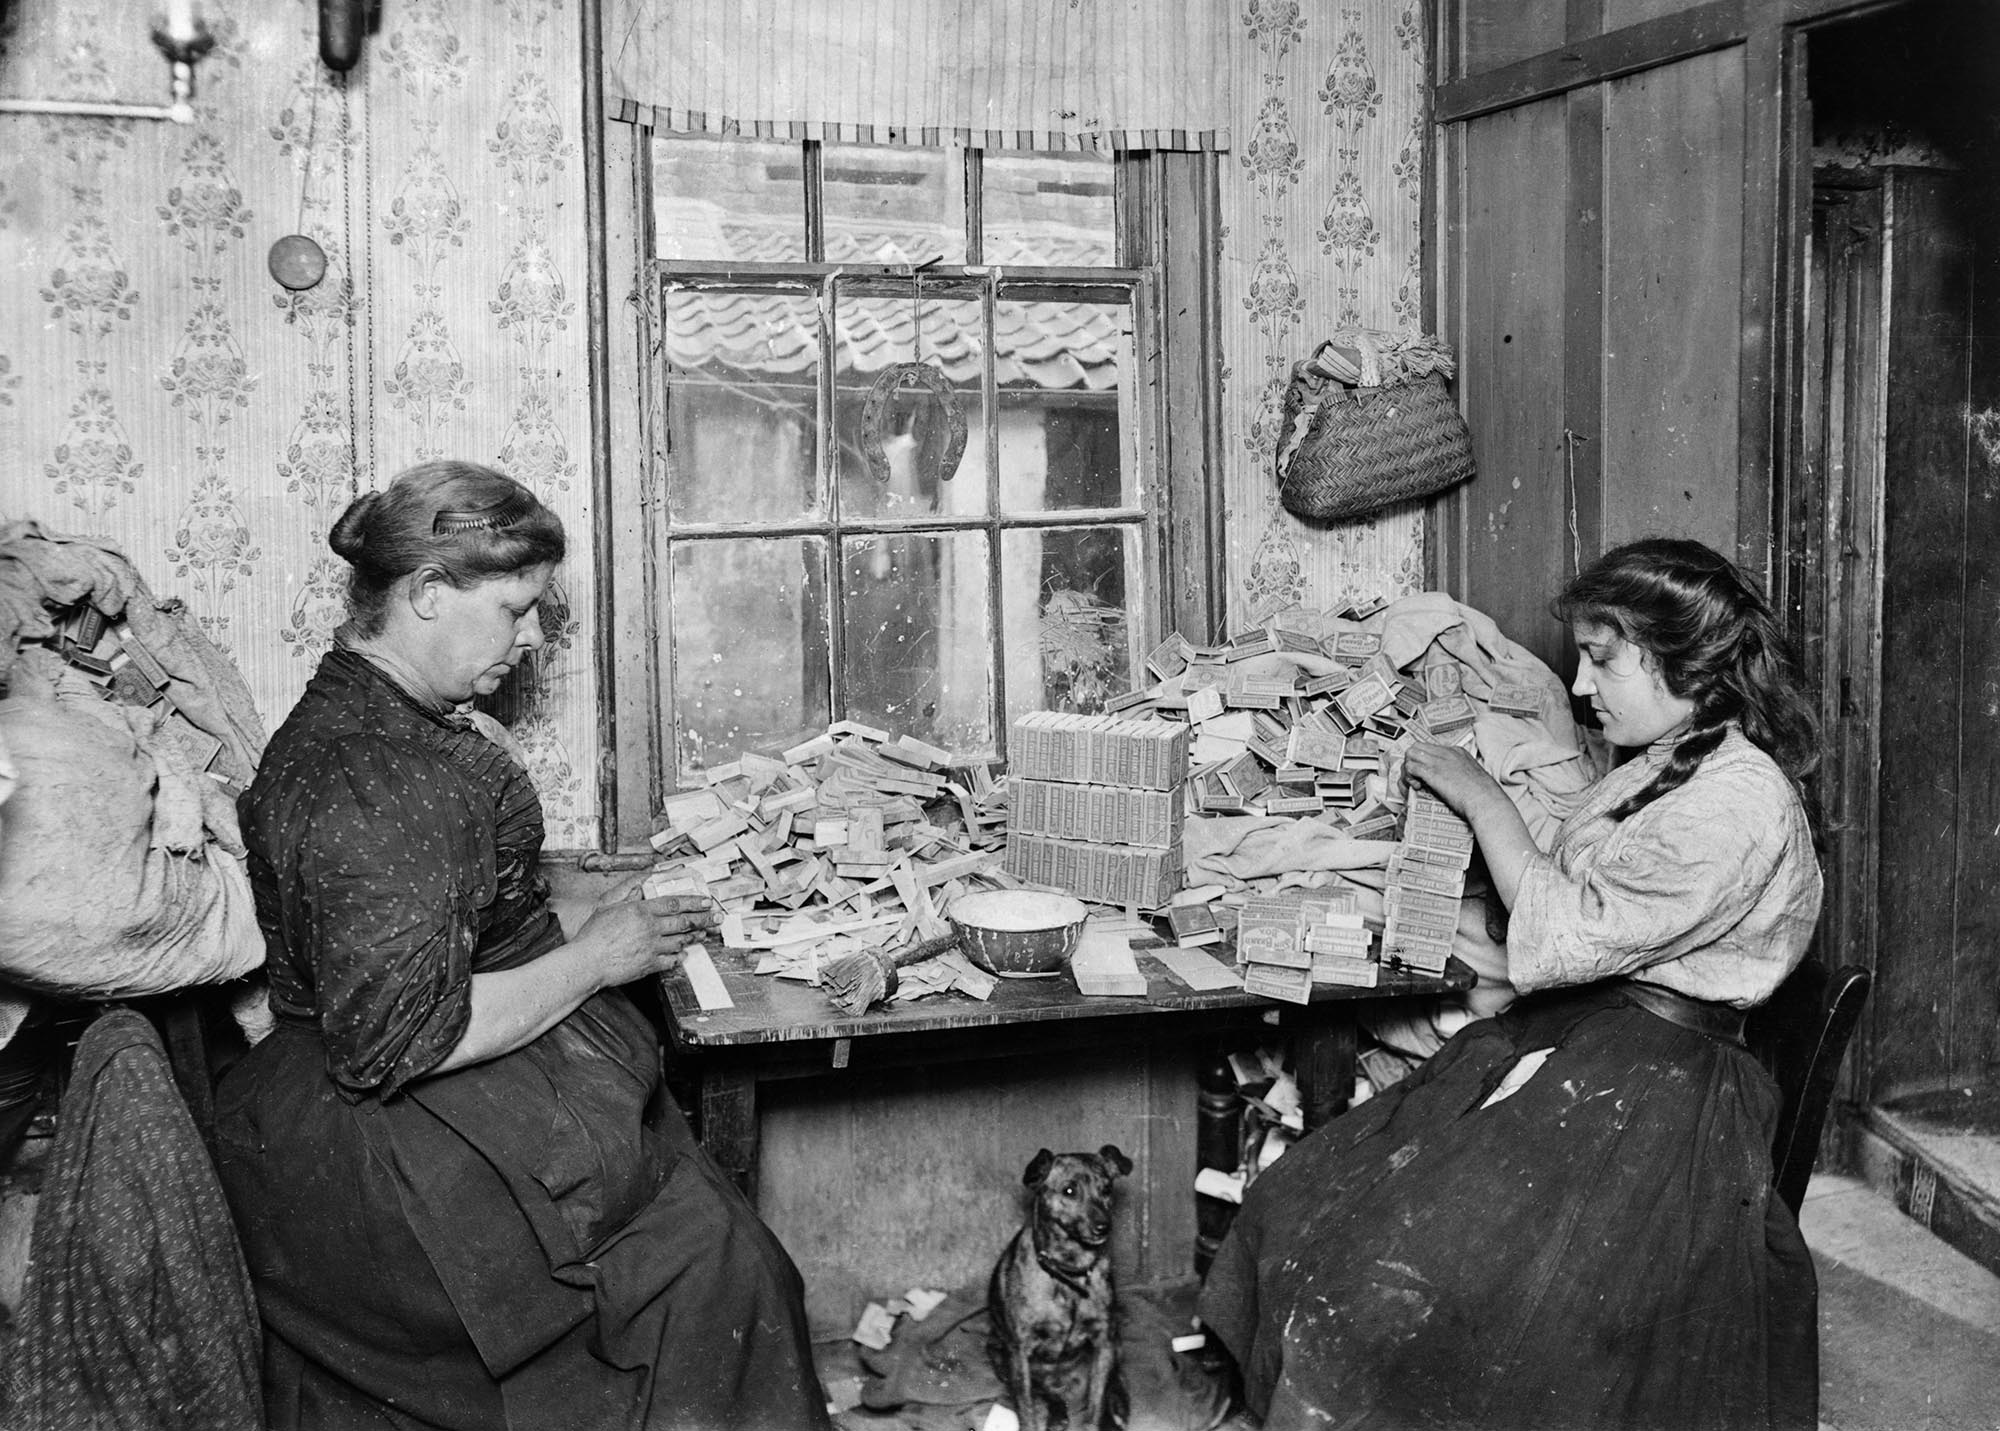 Two women assembling small boxes at a table in an unidentified house in the East End of London